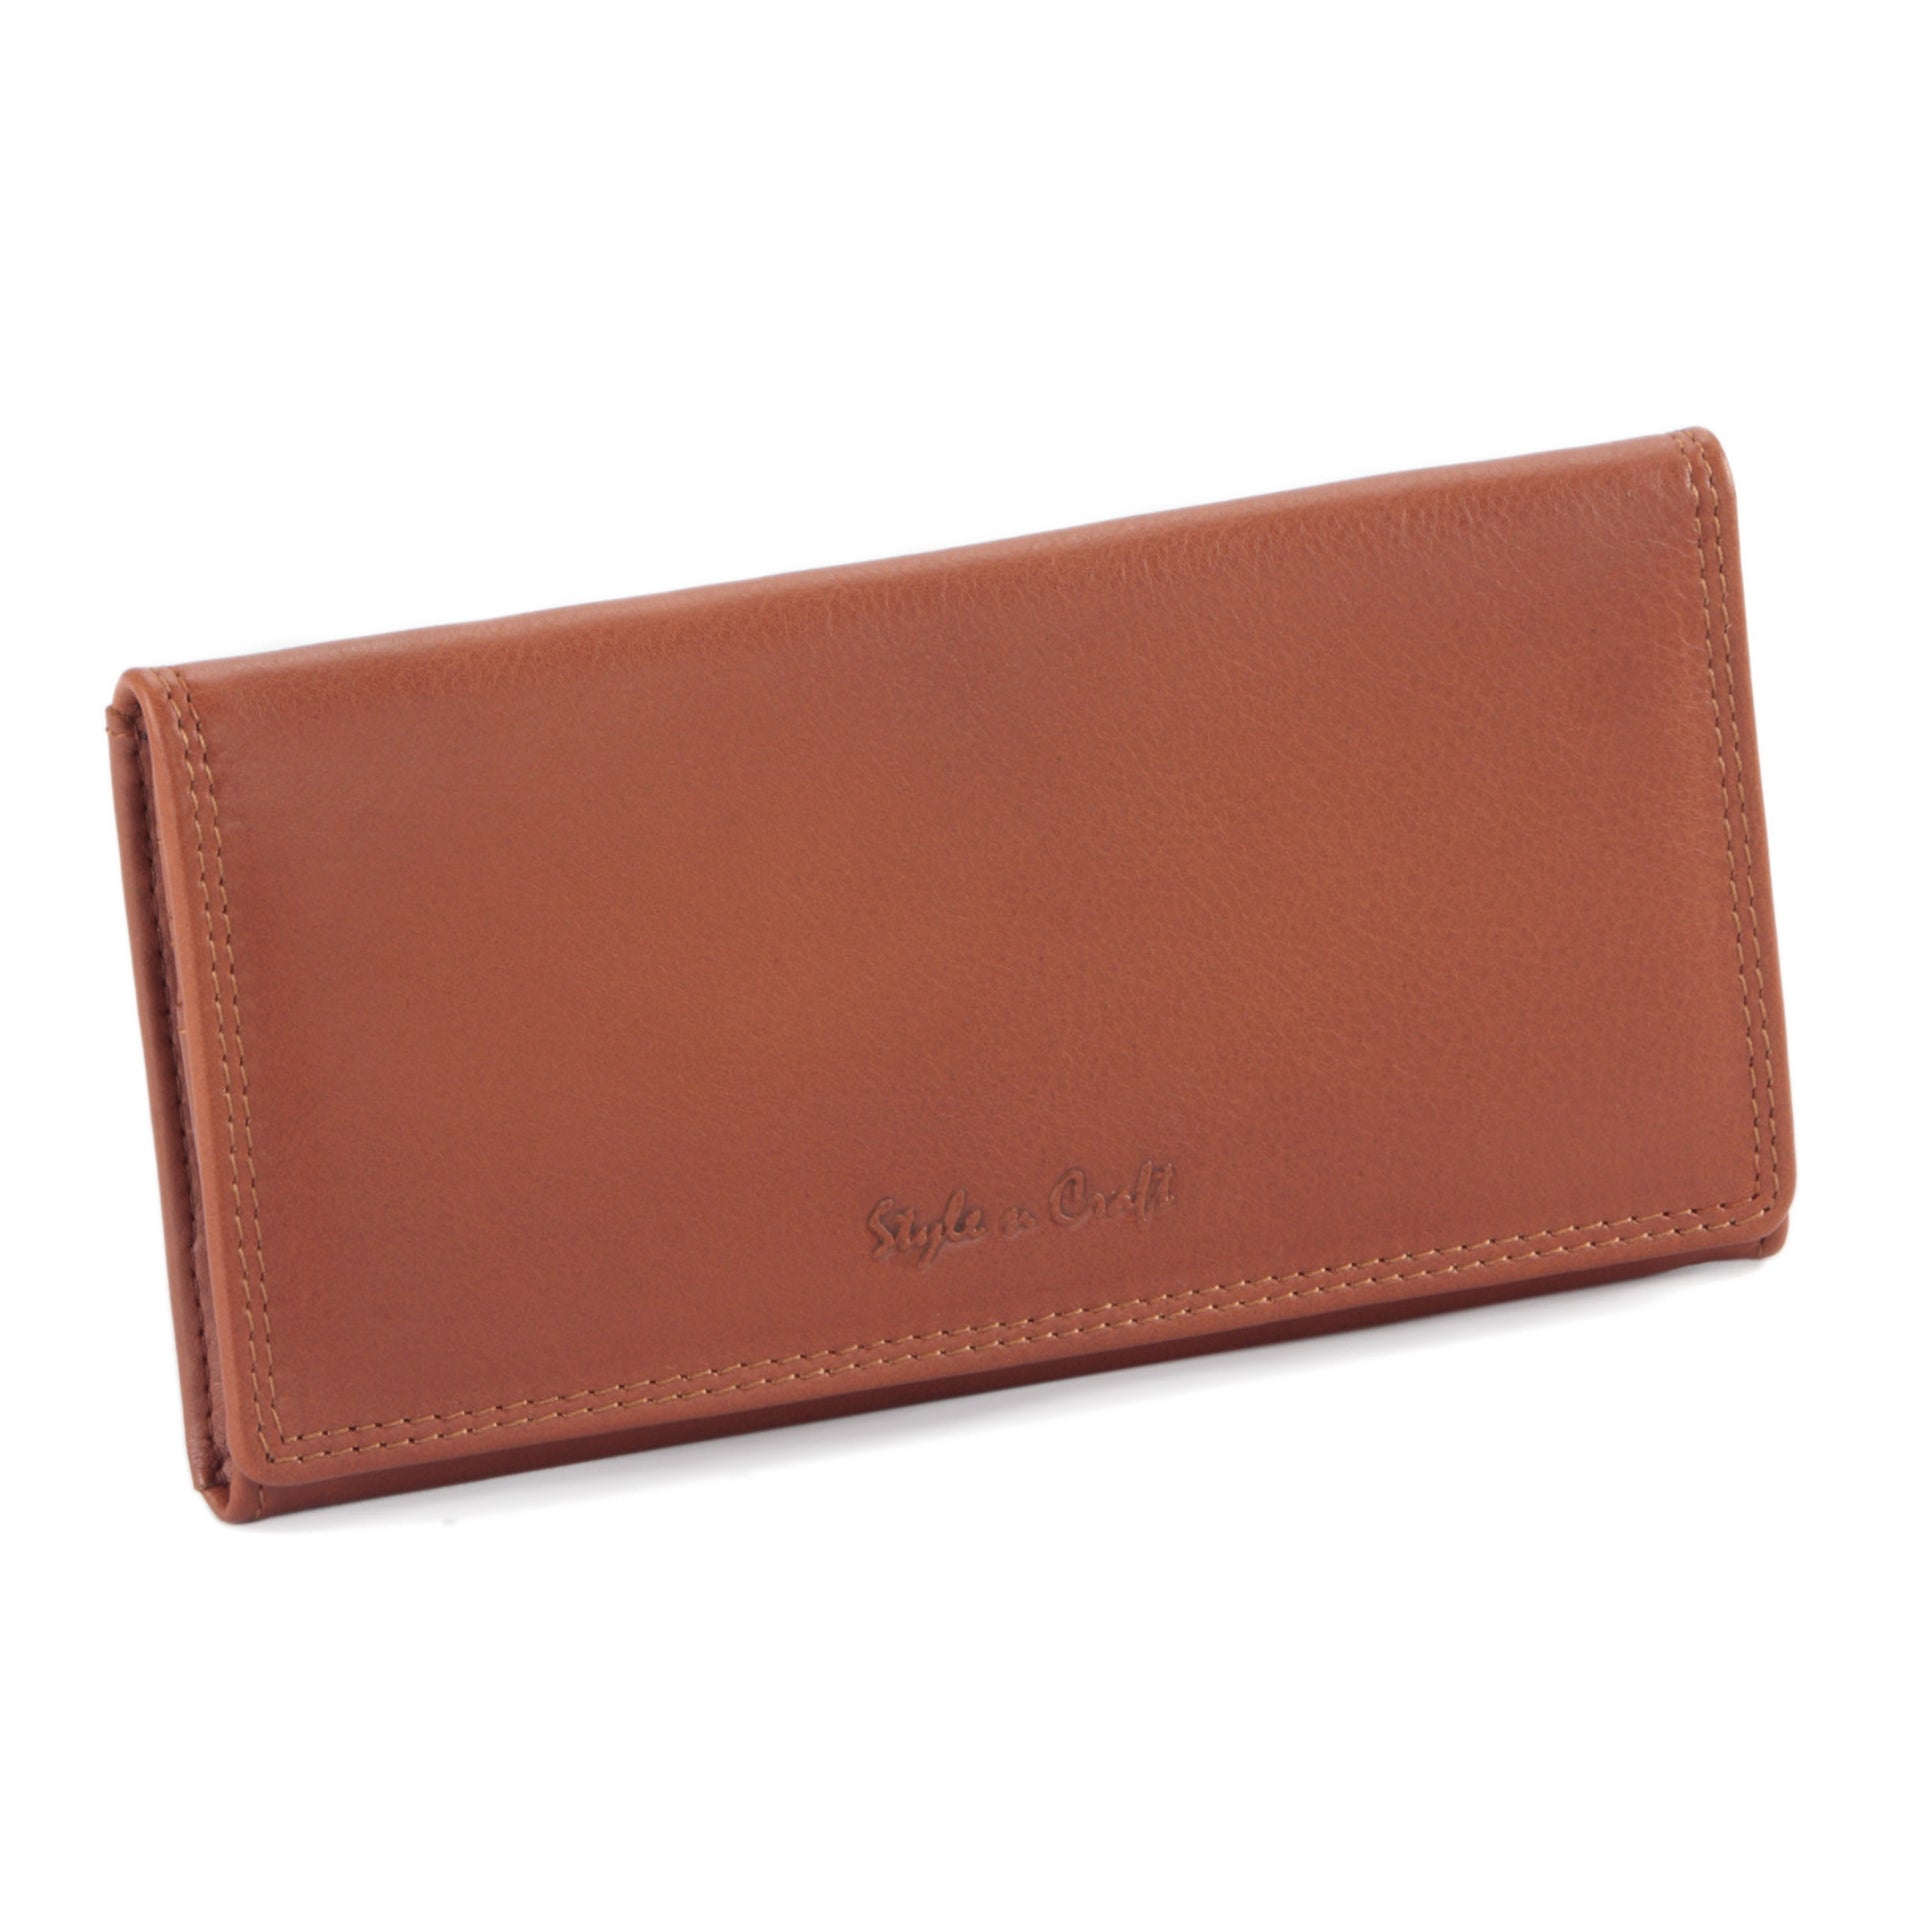  Style n Craft Ladies Clutch Wallet, Full-Grain Leather Wallet  for Women, RFID-Protected Wallet with Multiple Card Holders, Tan  (300953-CG) : Clothing, Shoes & Jewelry